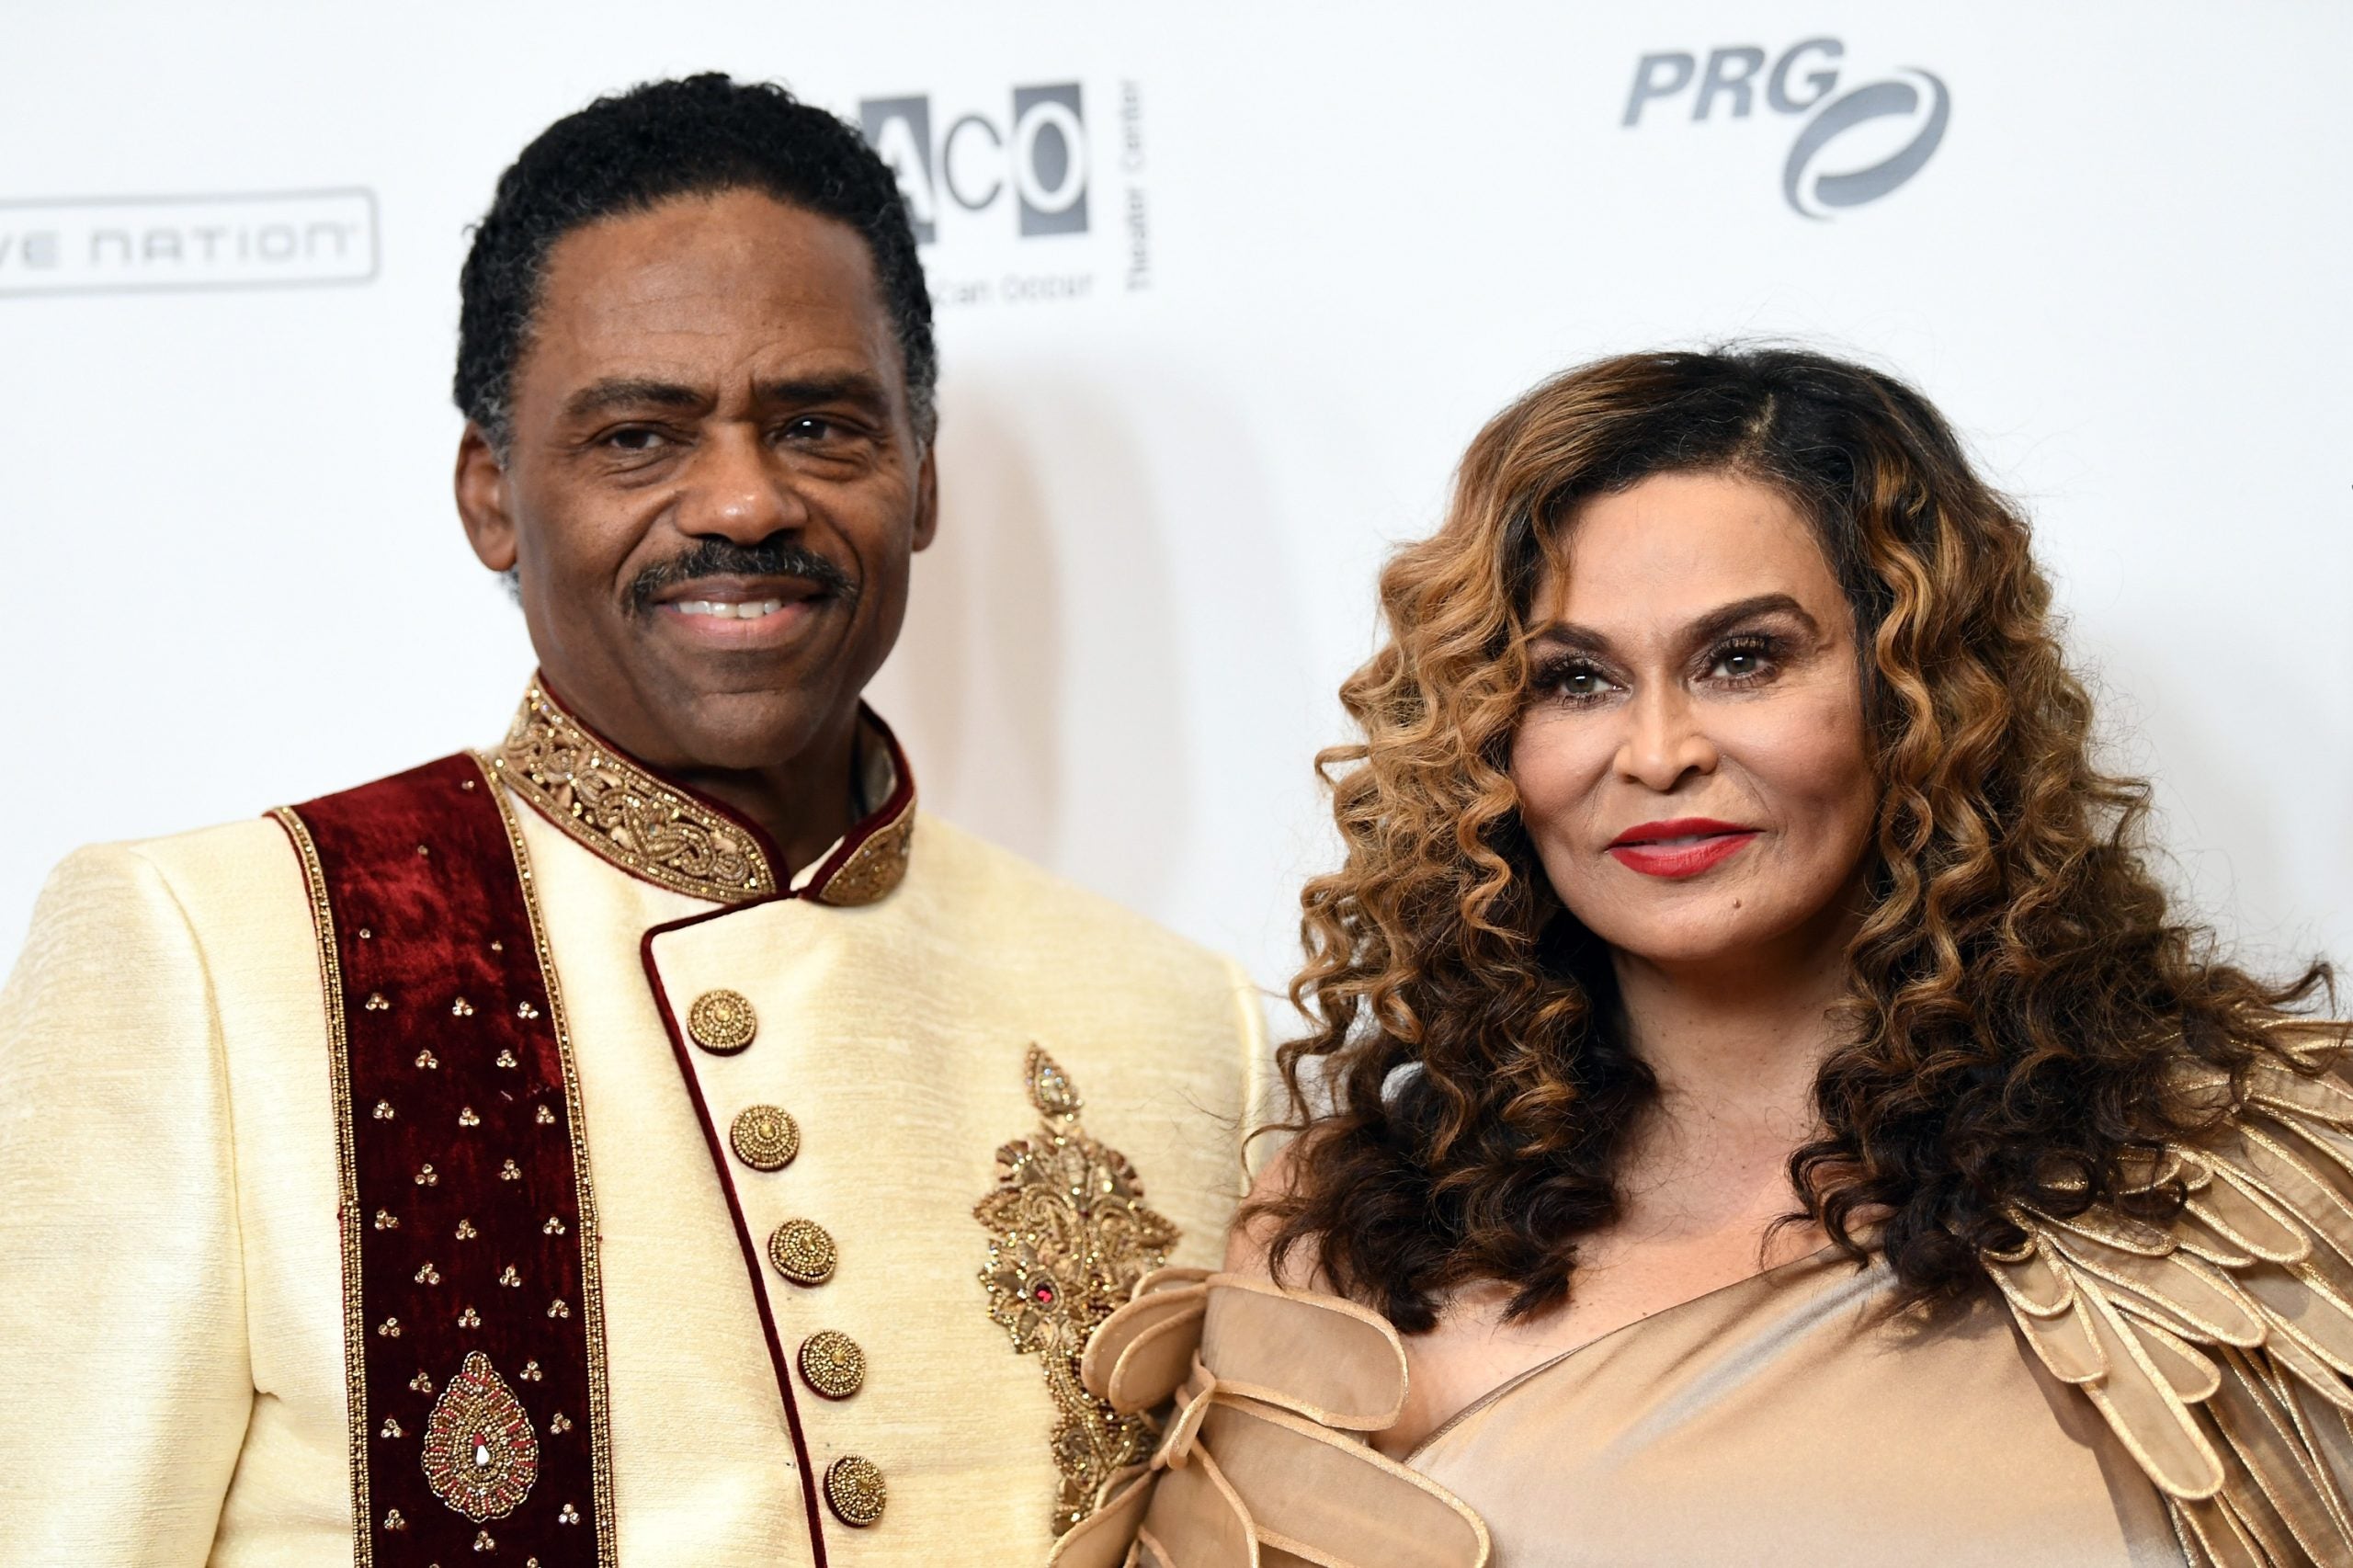 Richard Lawson Says Love Story With Tina Knowles-Lawson Actually Began 39 Years Ago: “It Was Well Worth The Wait”